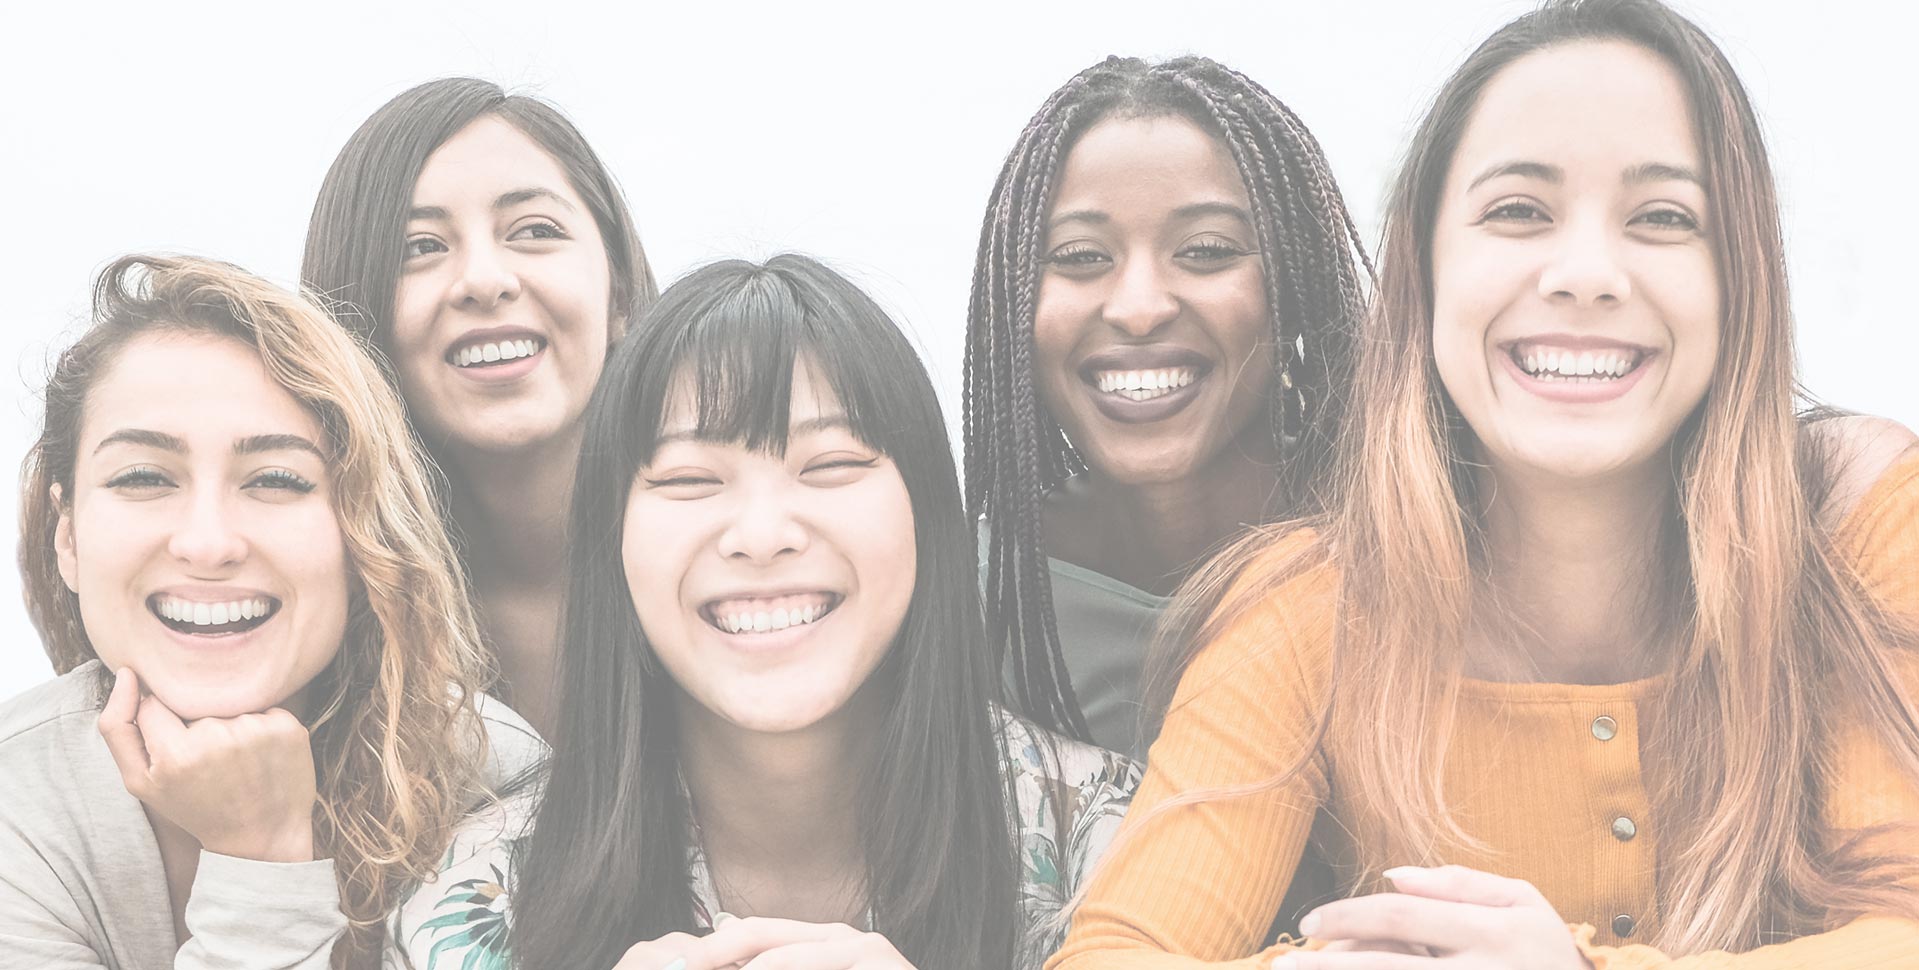 Healthcare for adolescents provided at St. Theresa's OBGYN | Snellville Women's Health | Obstetrics & Gynecology | Gwinnett County